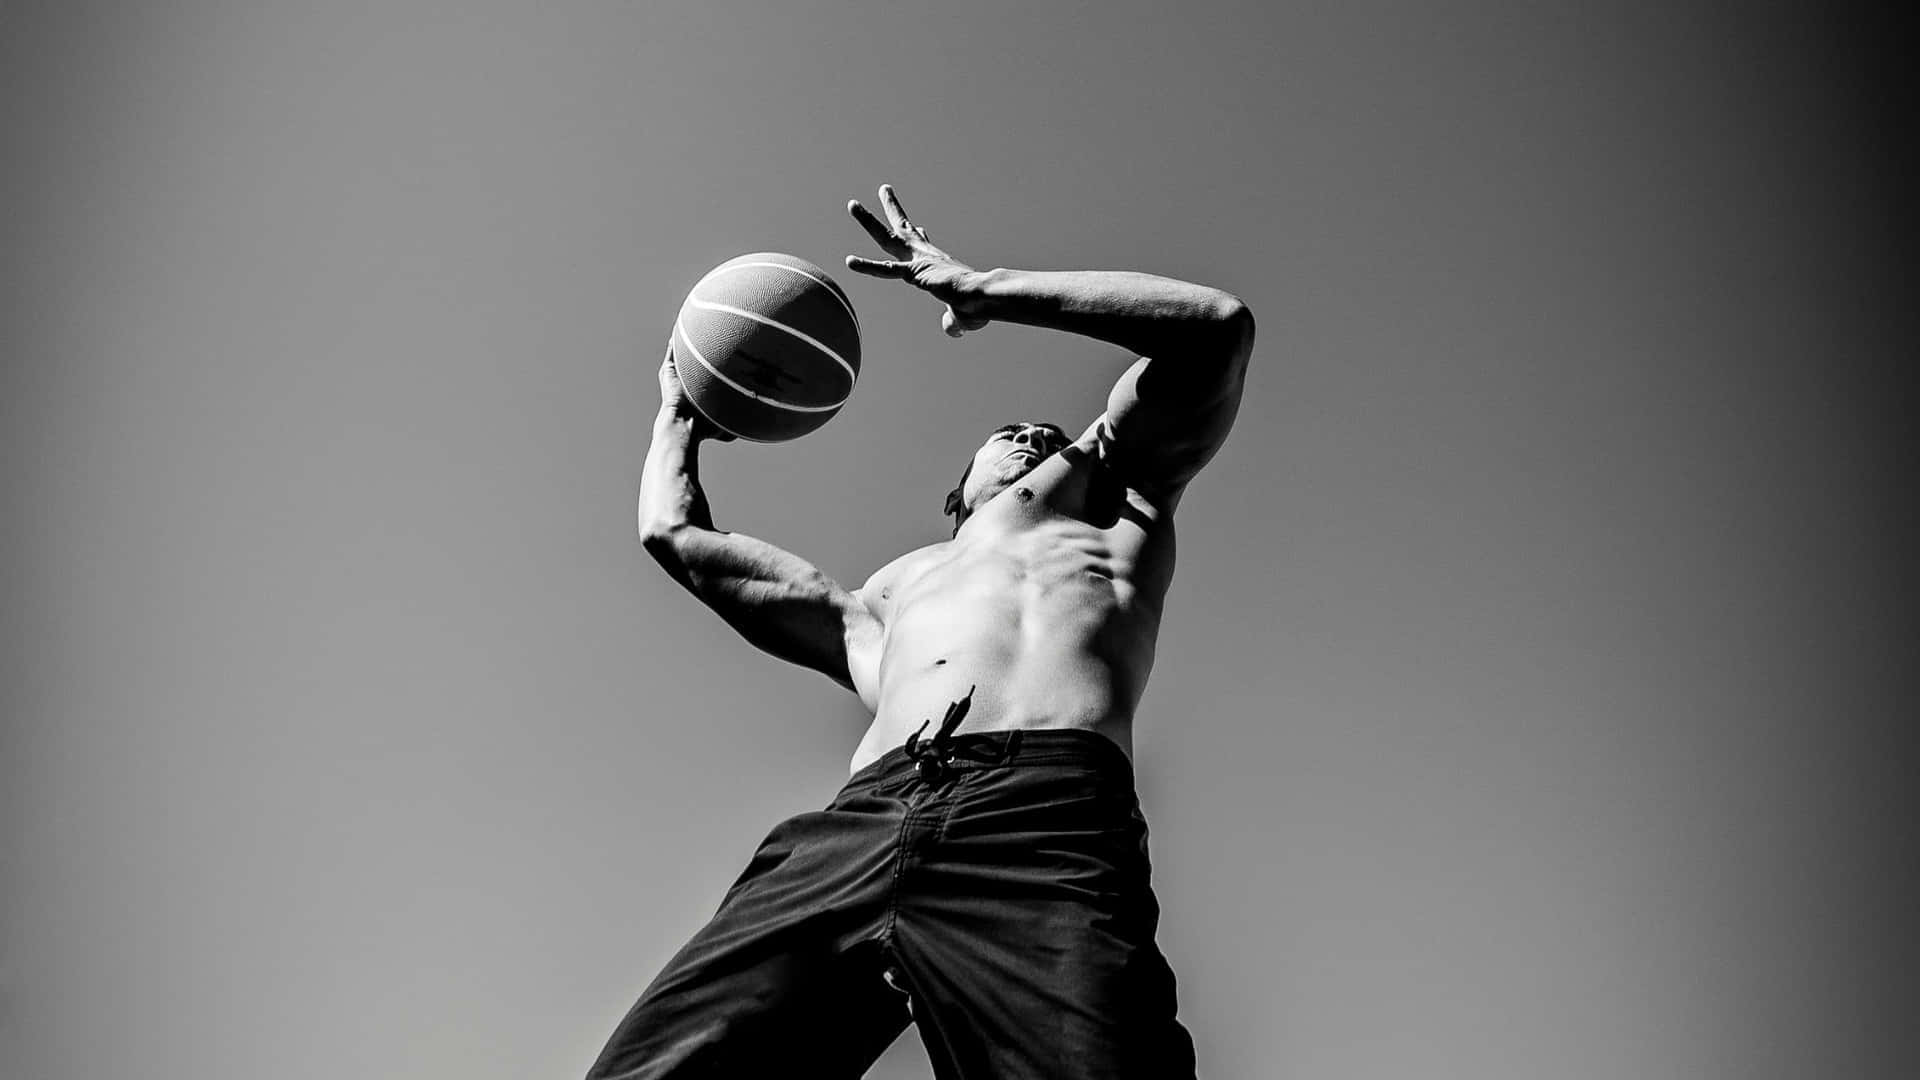 Aesthetics Of A Black Basketball Player Background